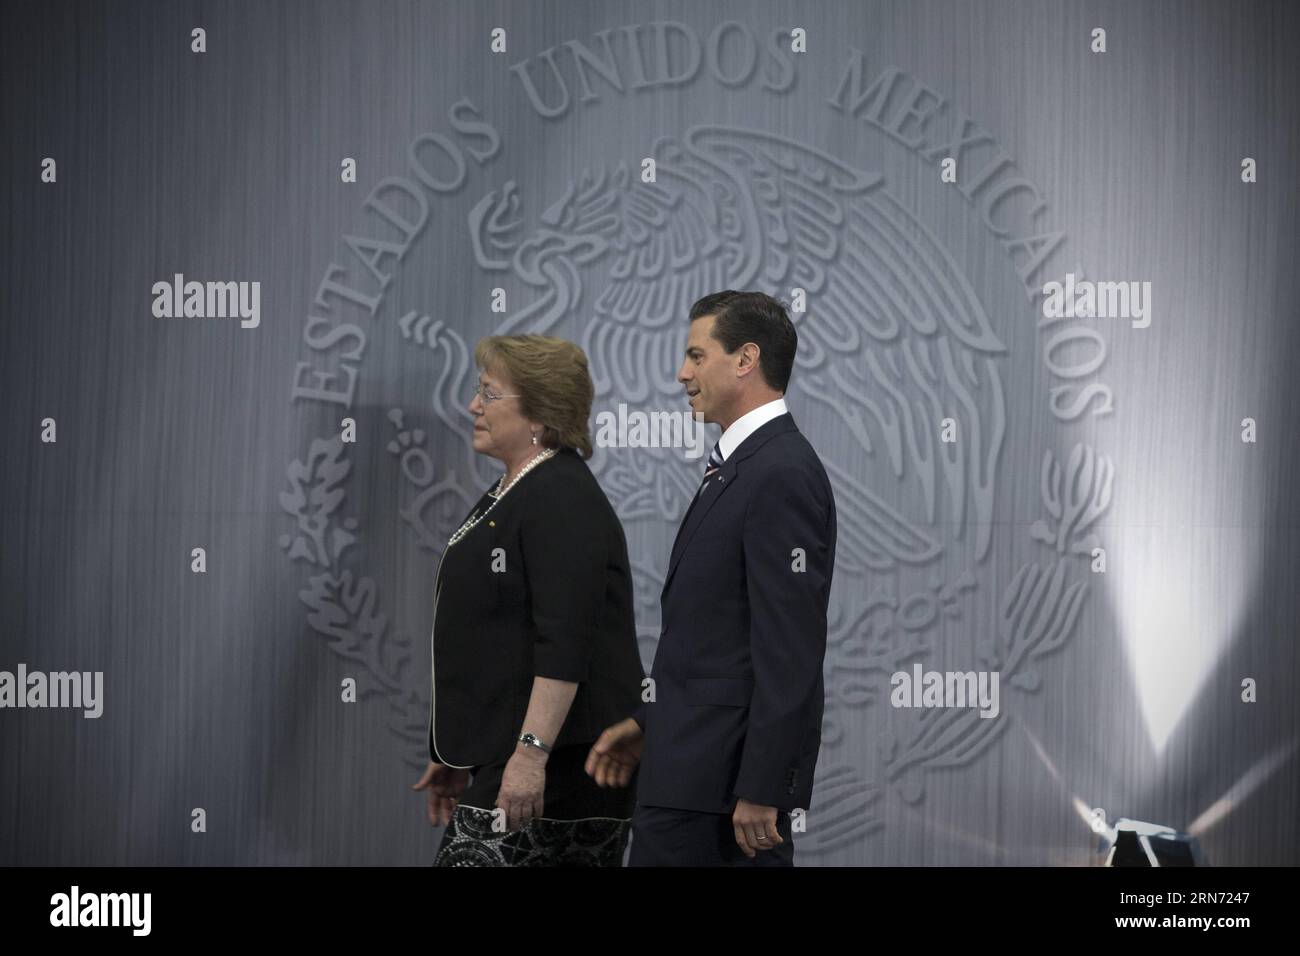 (150813) -- MEXICO CITY, Aug. 13, 2015 -- Mexican President Enrique Pena Nieto (R) and his Chilean counterpart Michelle Bachelet attend a joint press conference at Los Pinos Official Residence, in Mexico City, capital of Mexico, on Aug. 13, 2015. Michelle Bachelet started on Thursday a two-day State visit to Mexico. Alejandro Ayala) (fnc) MEXICO-MEXICO CITY-CHILE-PRESIDENT-VISIT e AlejandroxAyala PUBLICATIONxNOTxINxCHN   150813 Mexico City Aug 13 2015 MEXICAN President Enrique Pena Nieto r and His Chilean Part Michelle Bachelet attend a Joint Press Conference AT Los Pinos Official Residence in Stock Photo